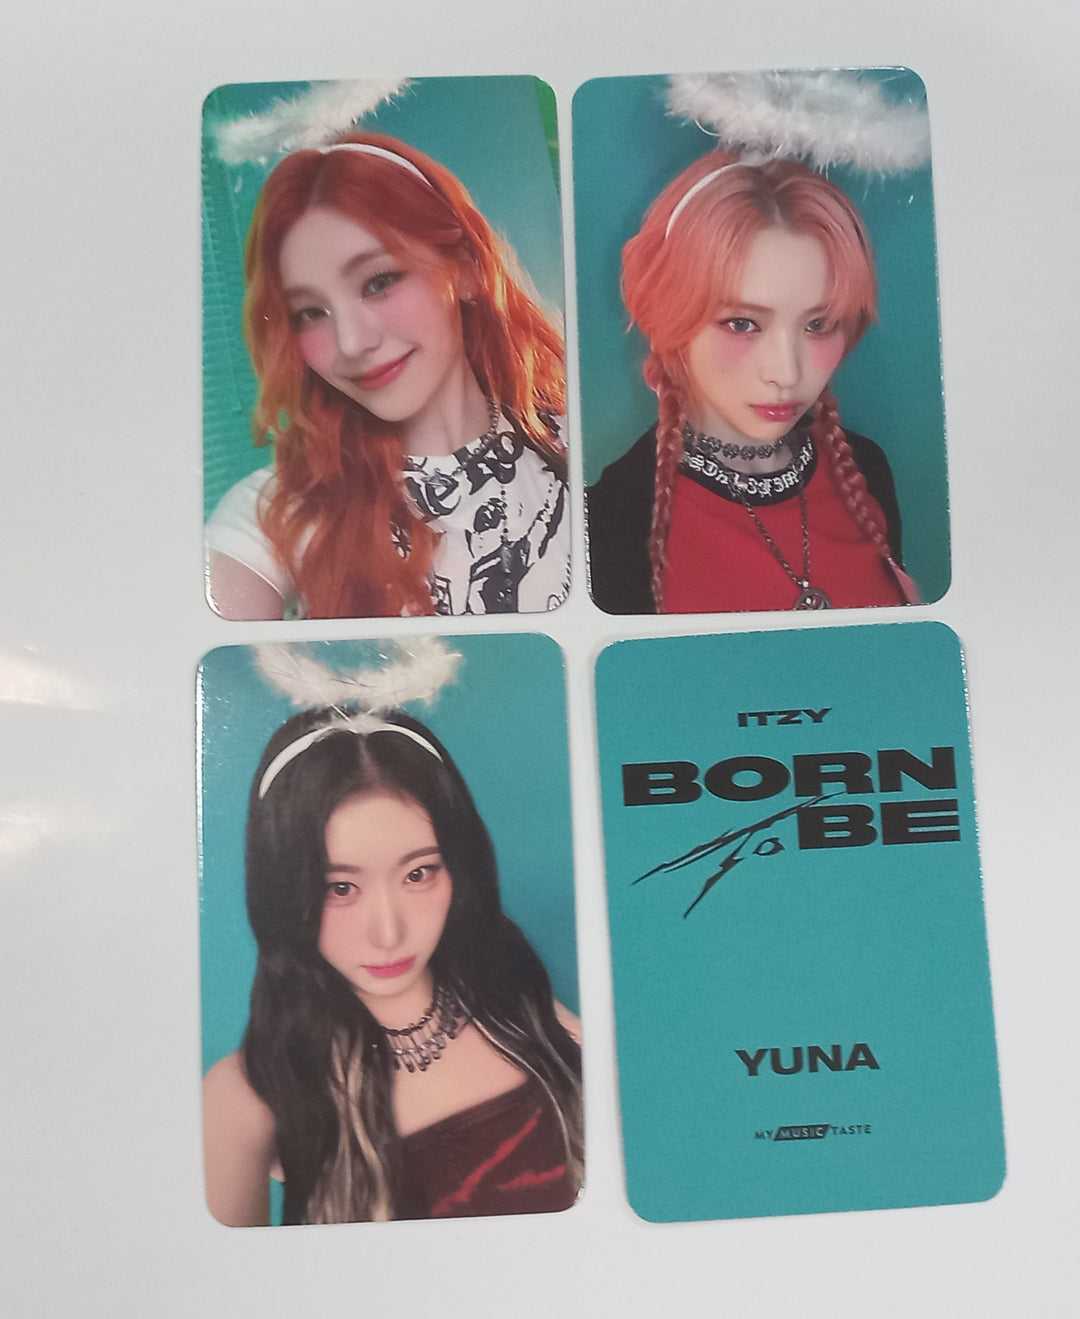 ITZY "BORN TO BE" - MMT Pre-Order Benefit Photocard [24.1.18]